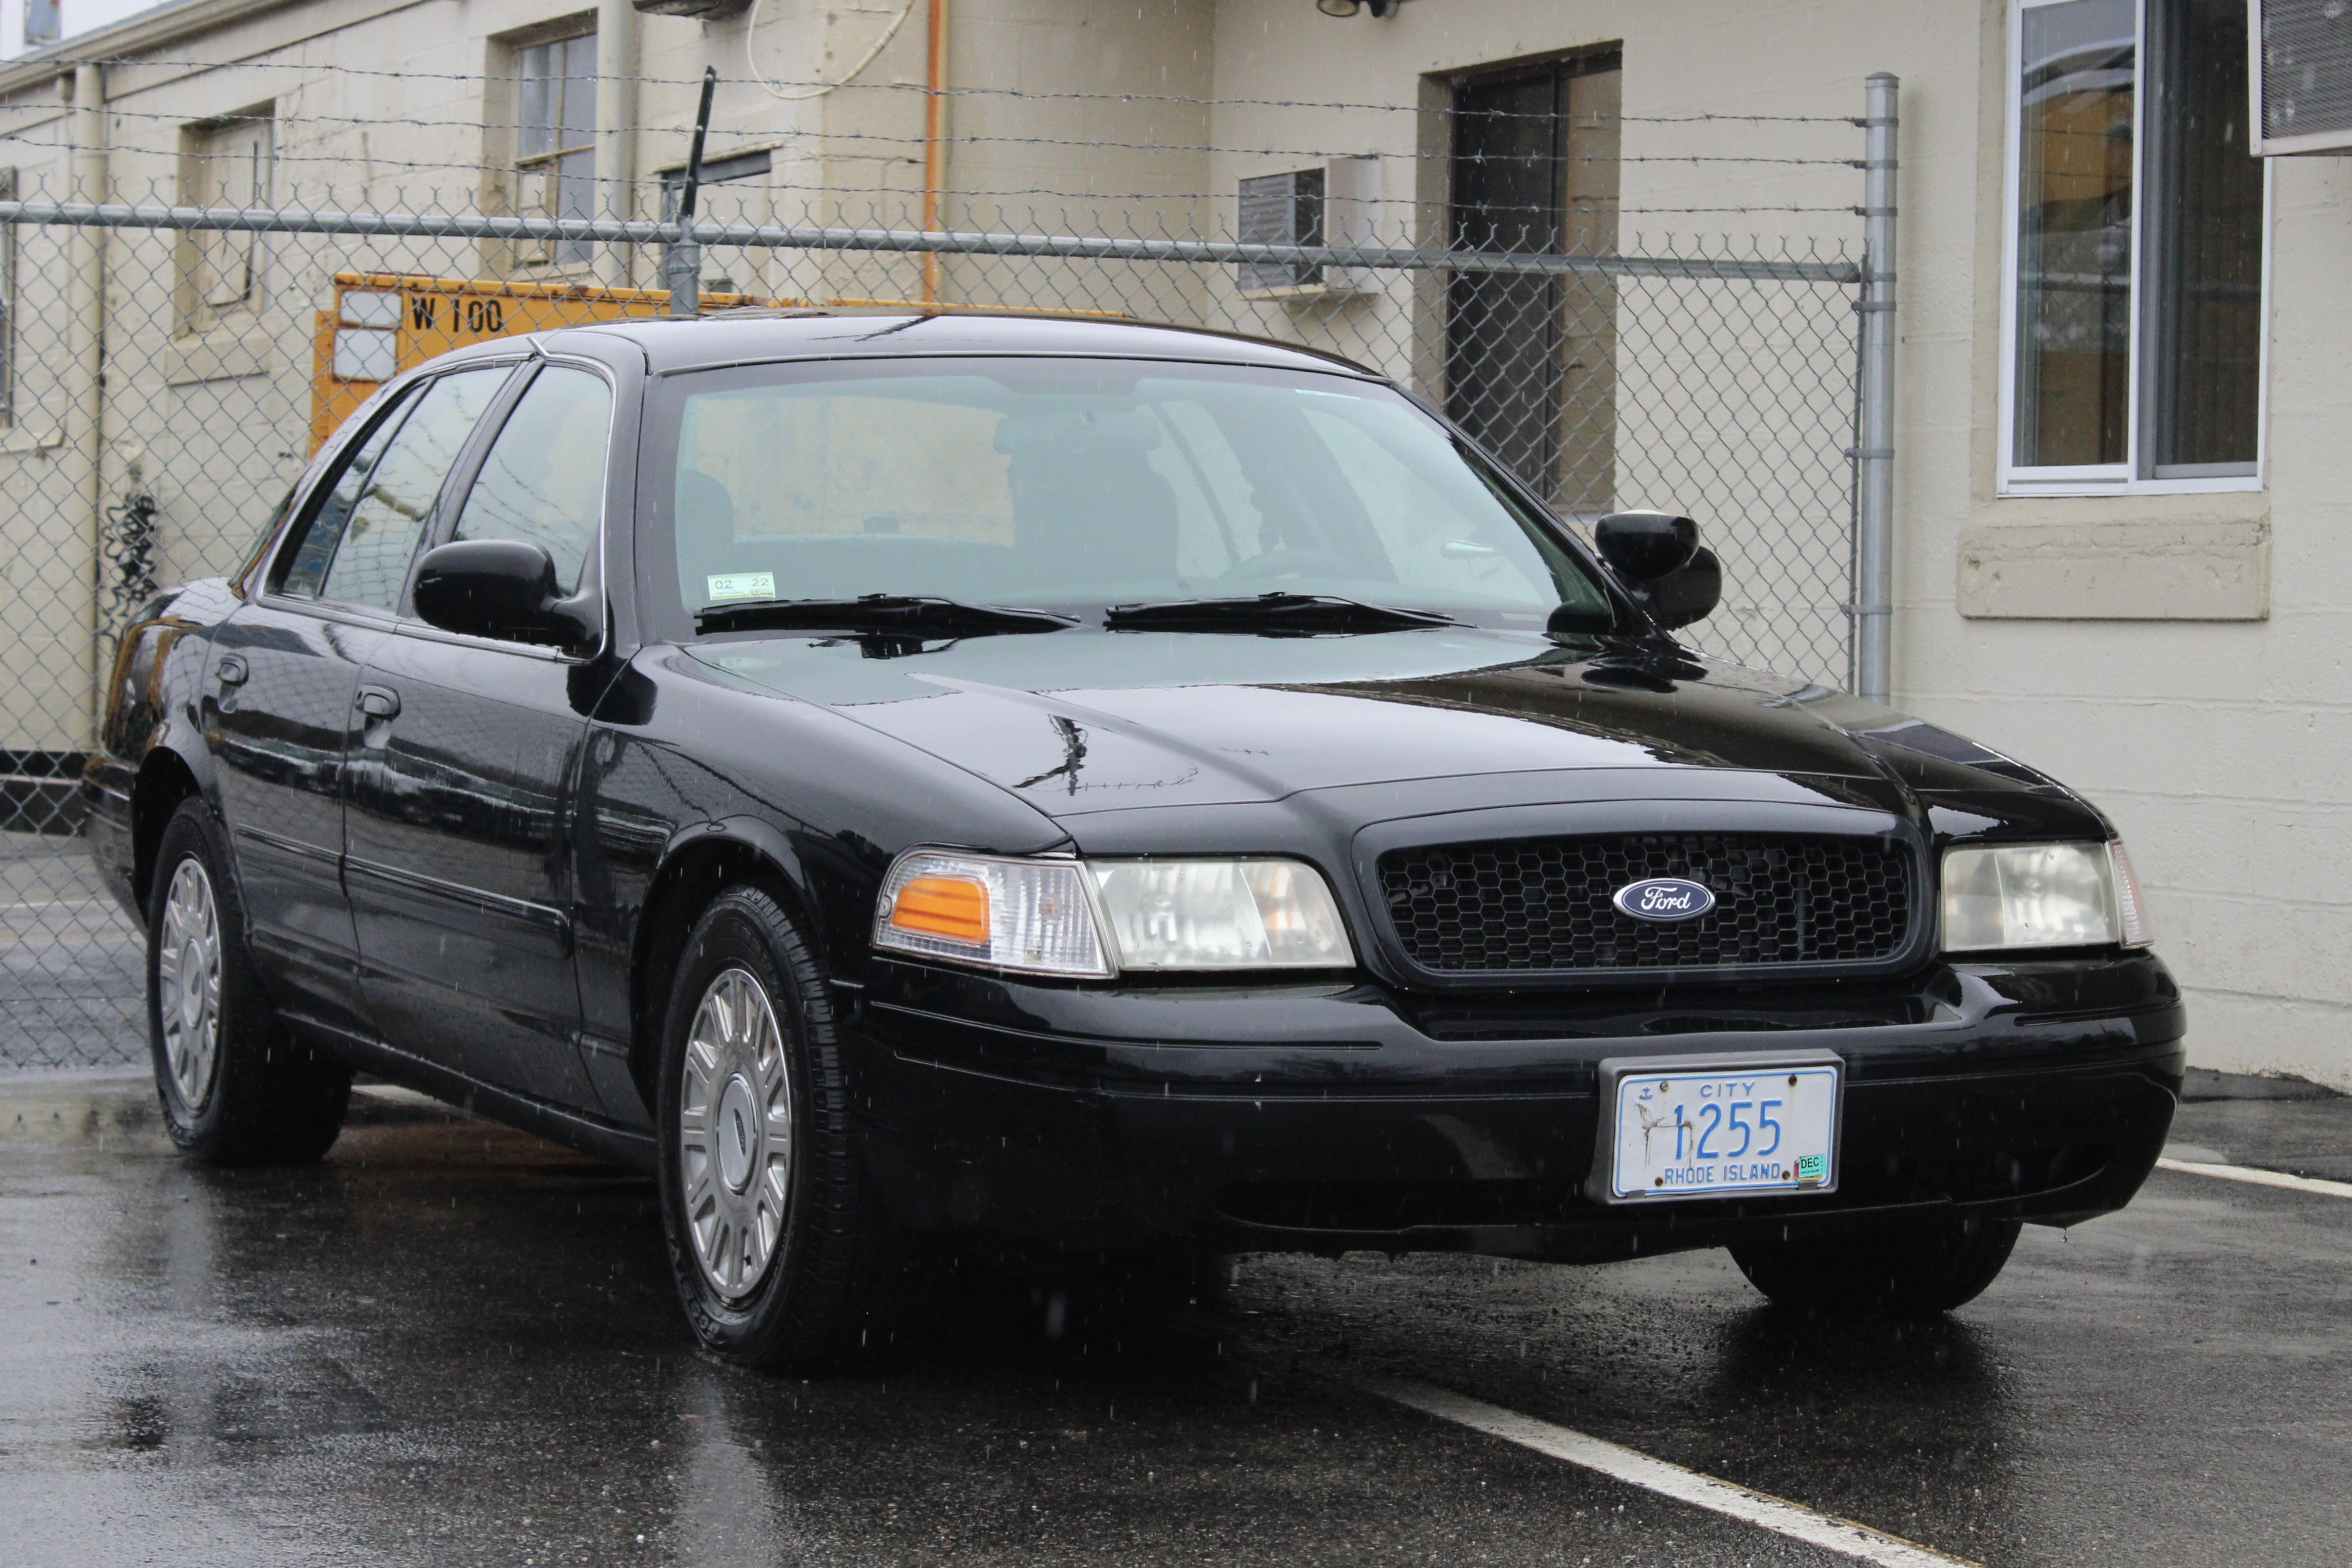 A photo  of Warwick Public Works
            Car 1255, a 2003-2004 Ford Crown Victoria Police Interceptor             taken by @riemergencyvehicles